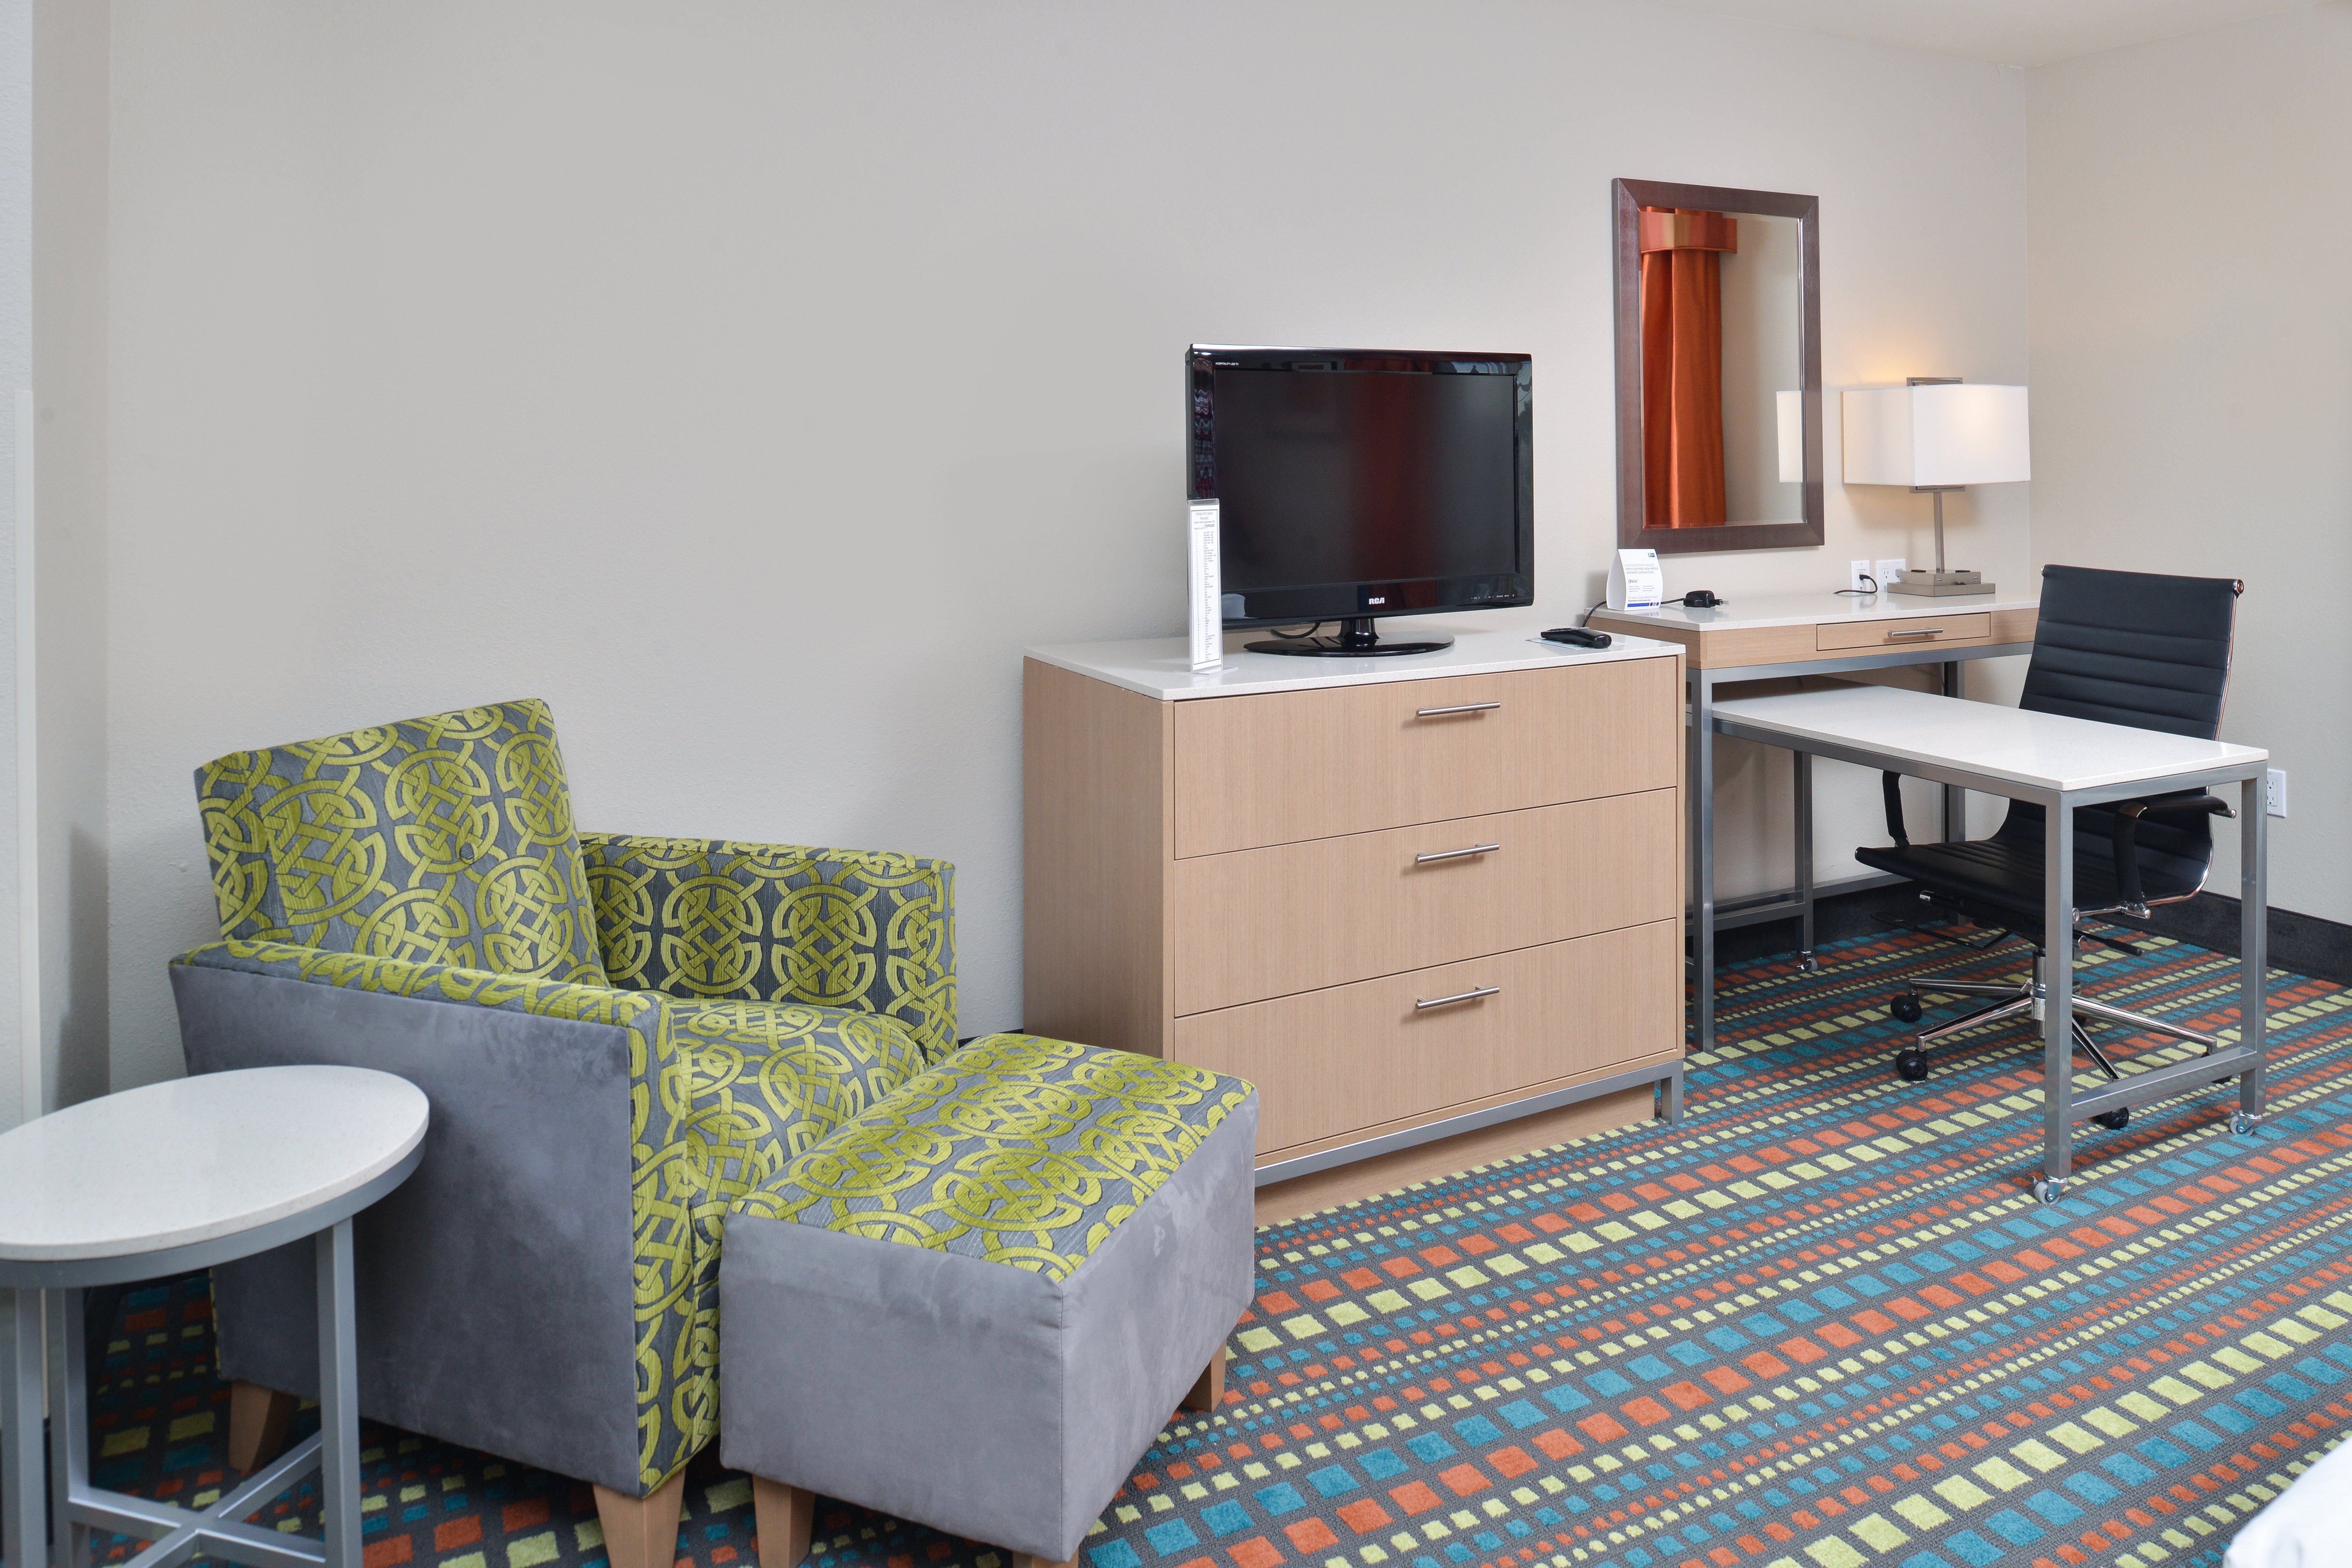 Need space to relax or work? This rooms features are perfect!